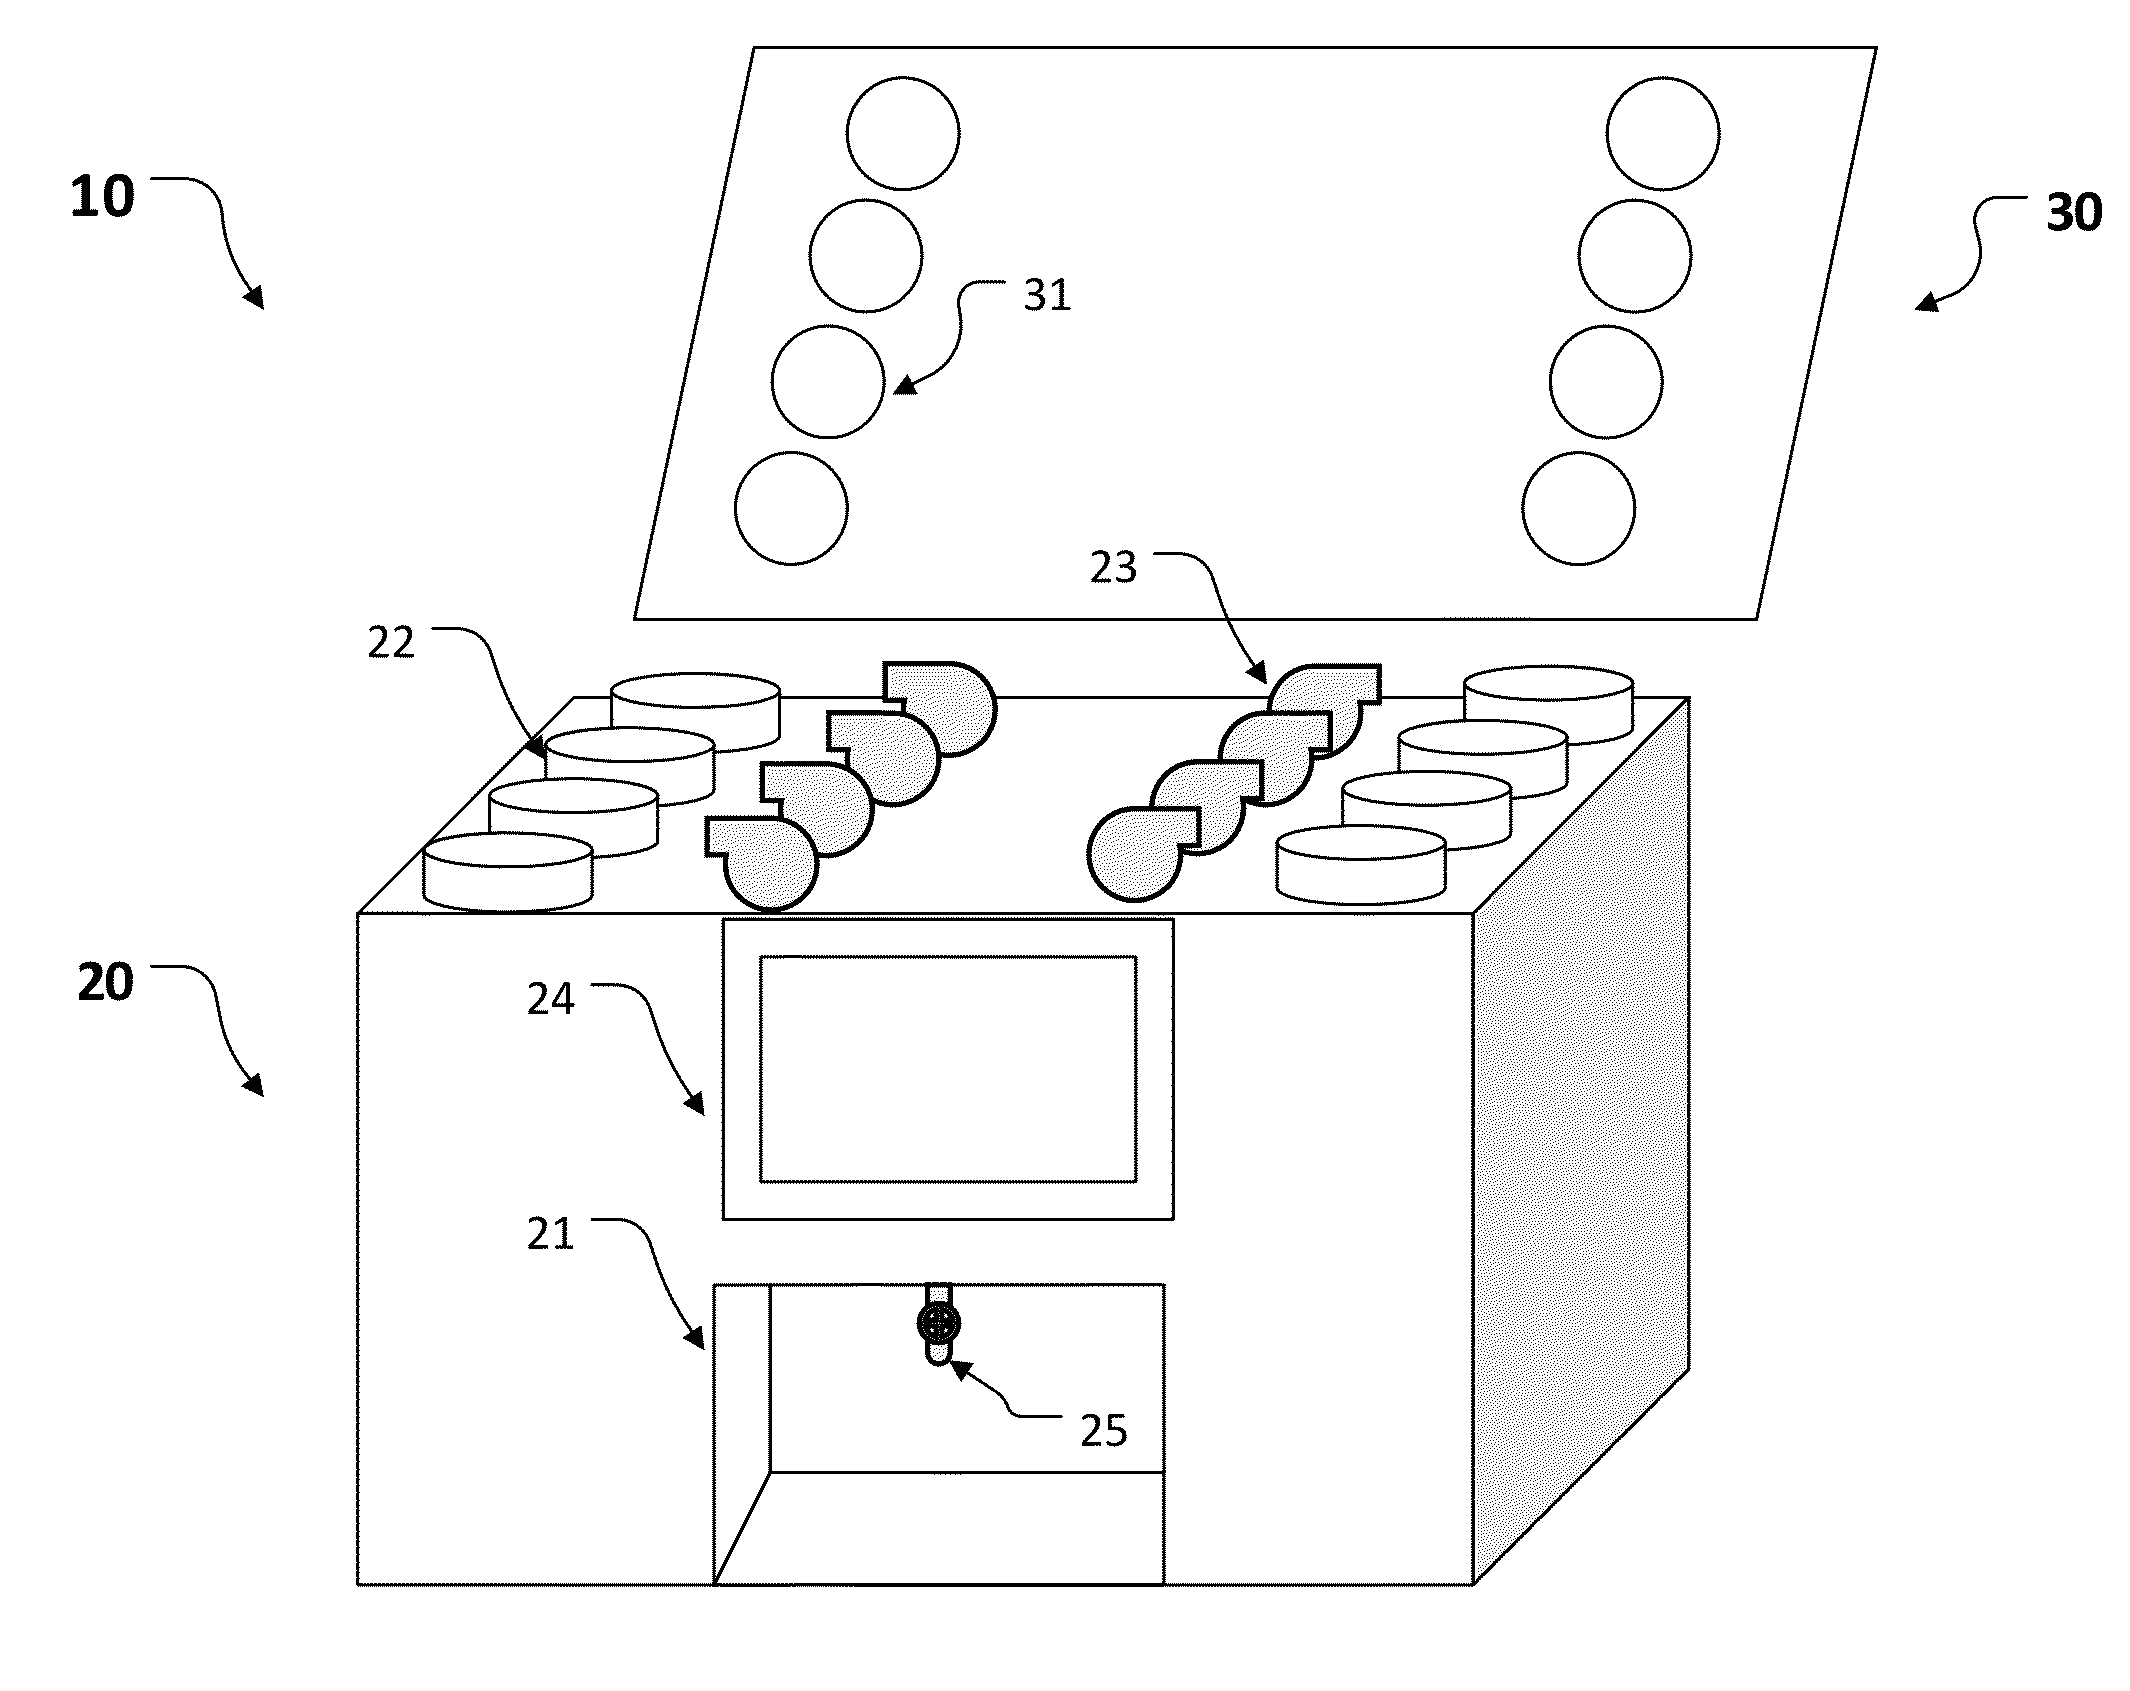 Systems and Methods for Automatic Mixed Drink Dispensing